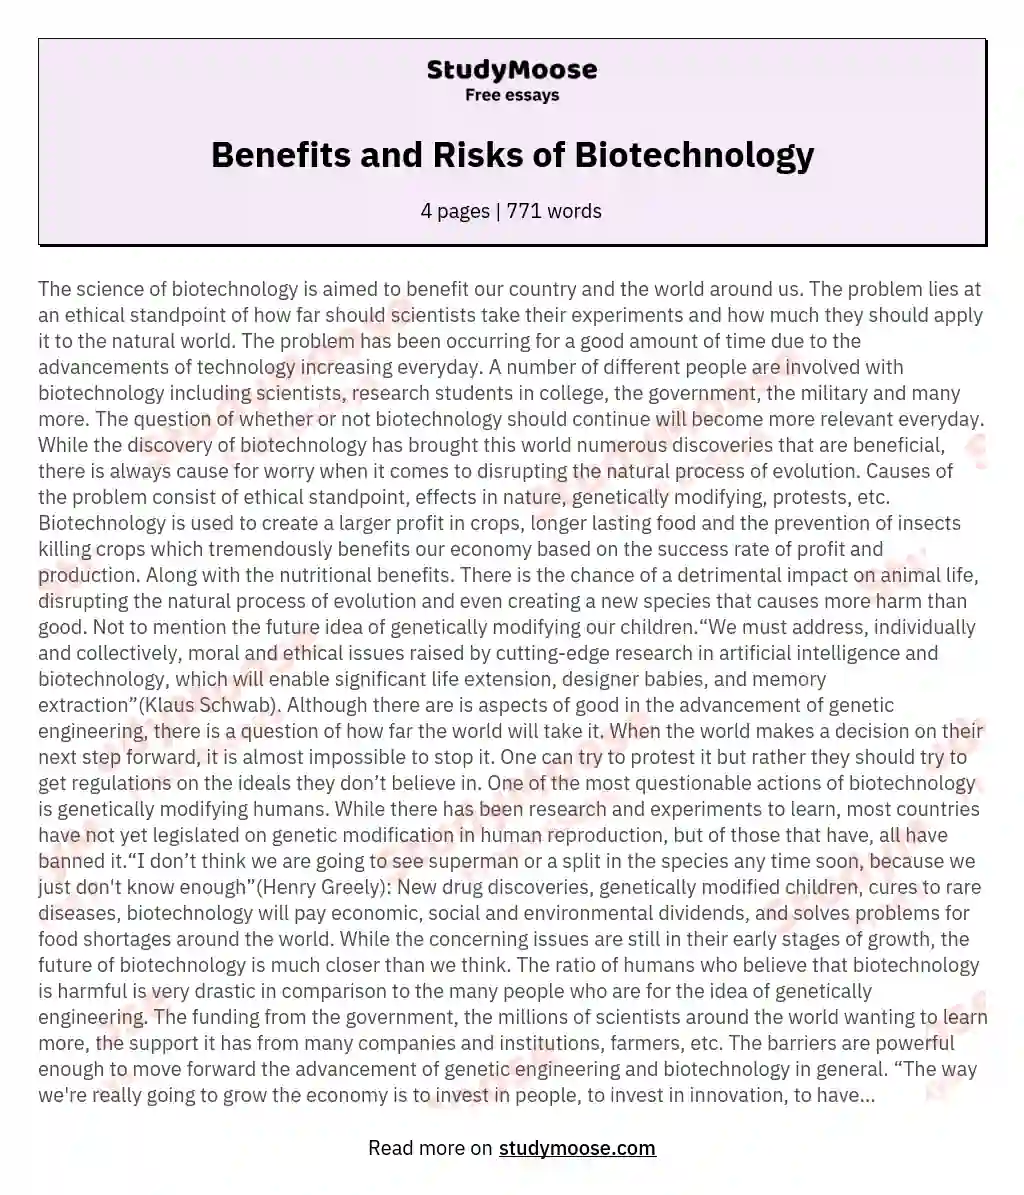 Benefits and Risks of Biotechnology essay